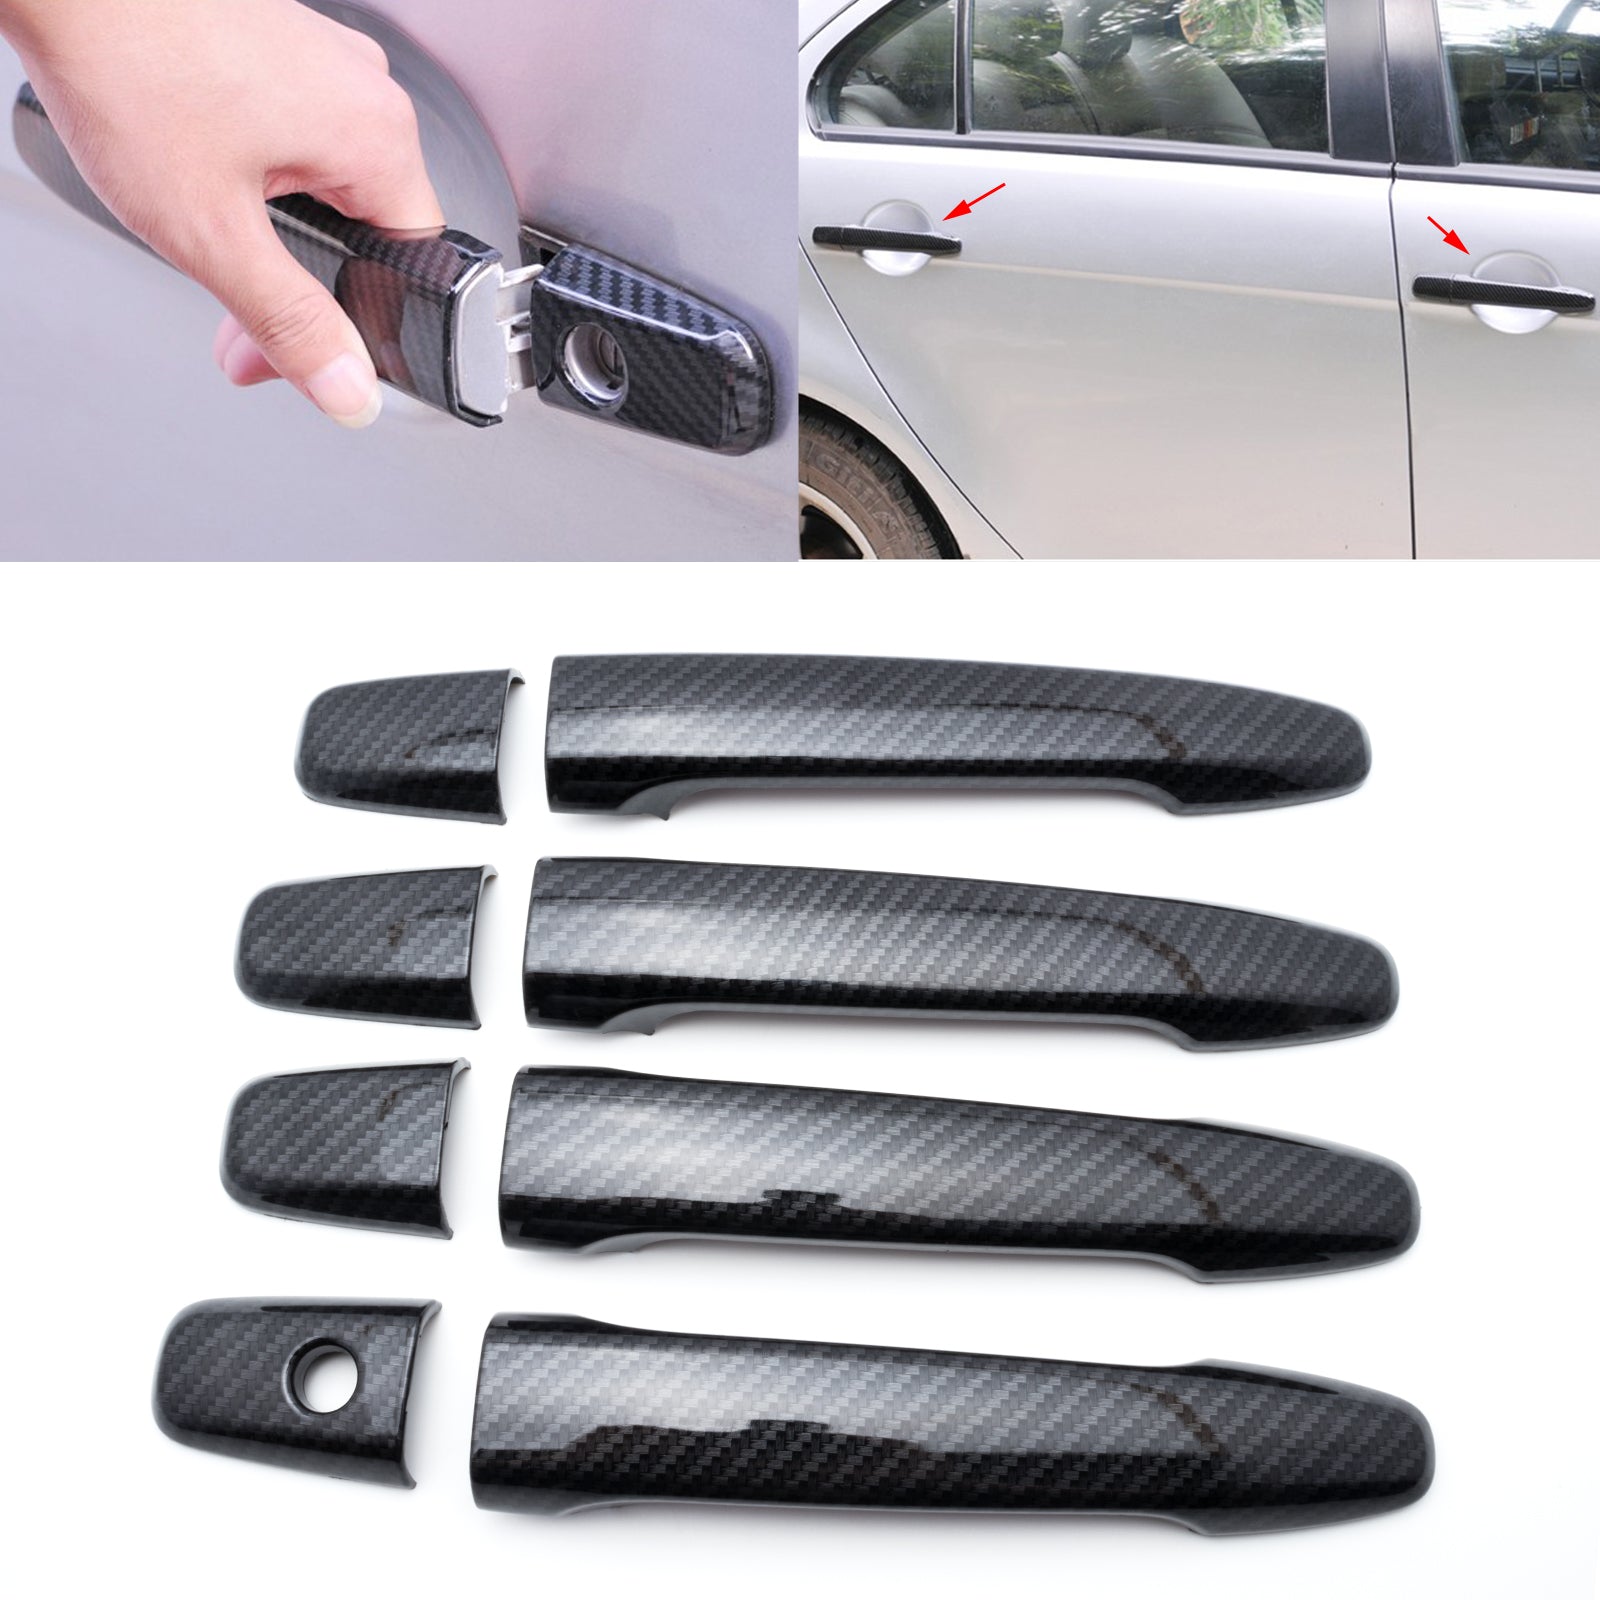 New Carbon Fiber Style Side Door Handle Cover Protector Trim for Mitsu